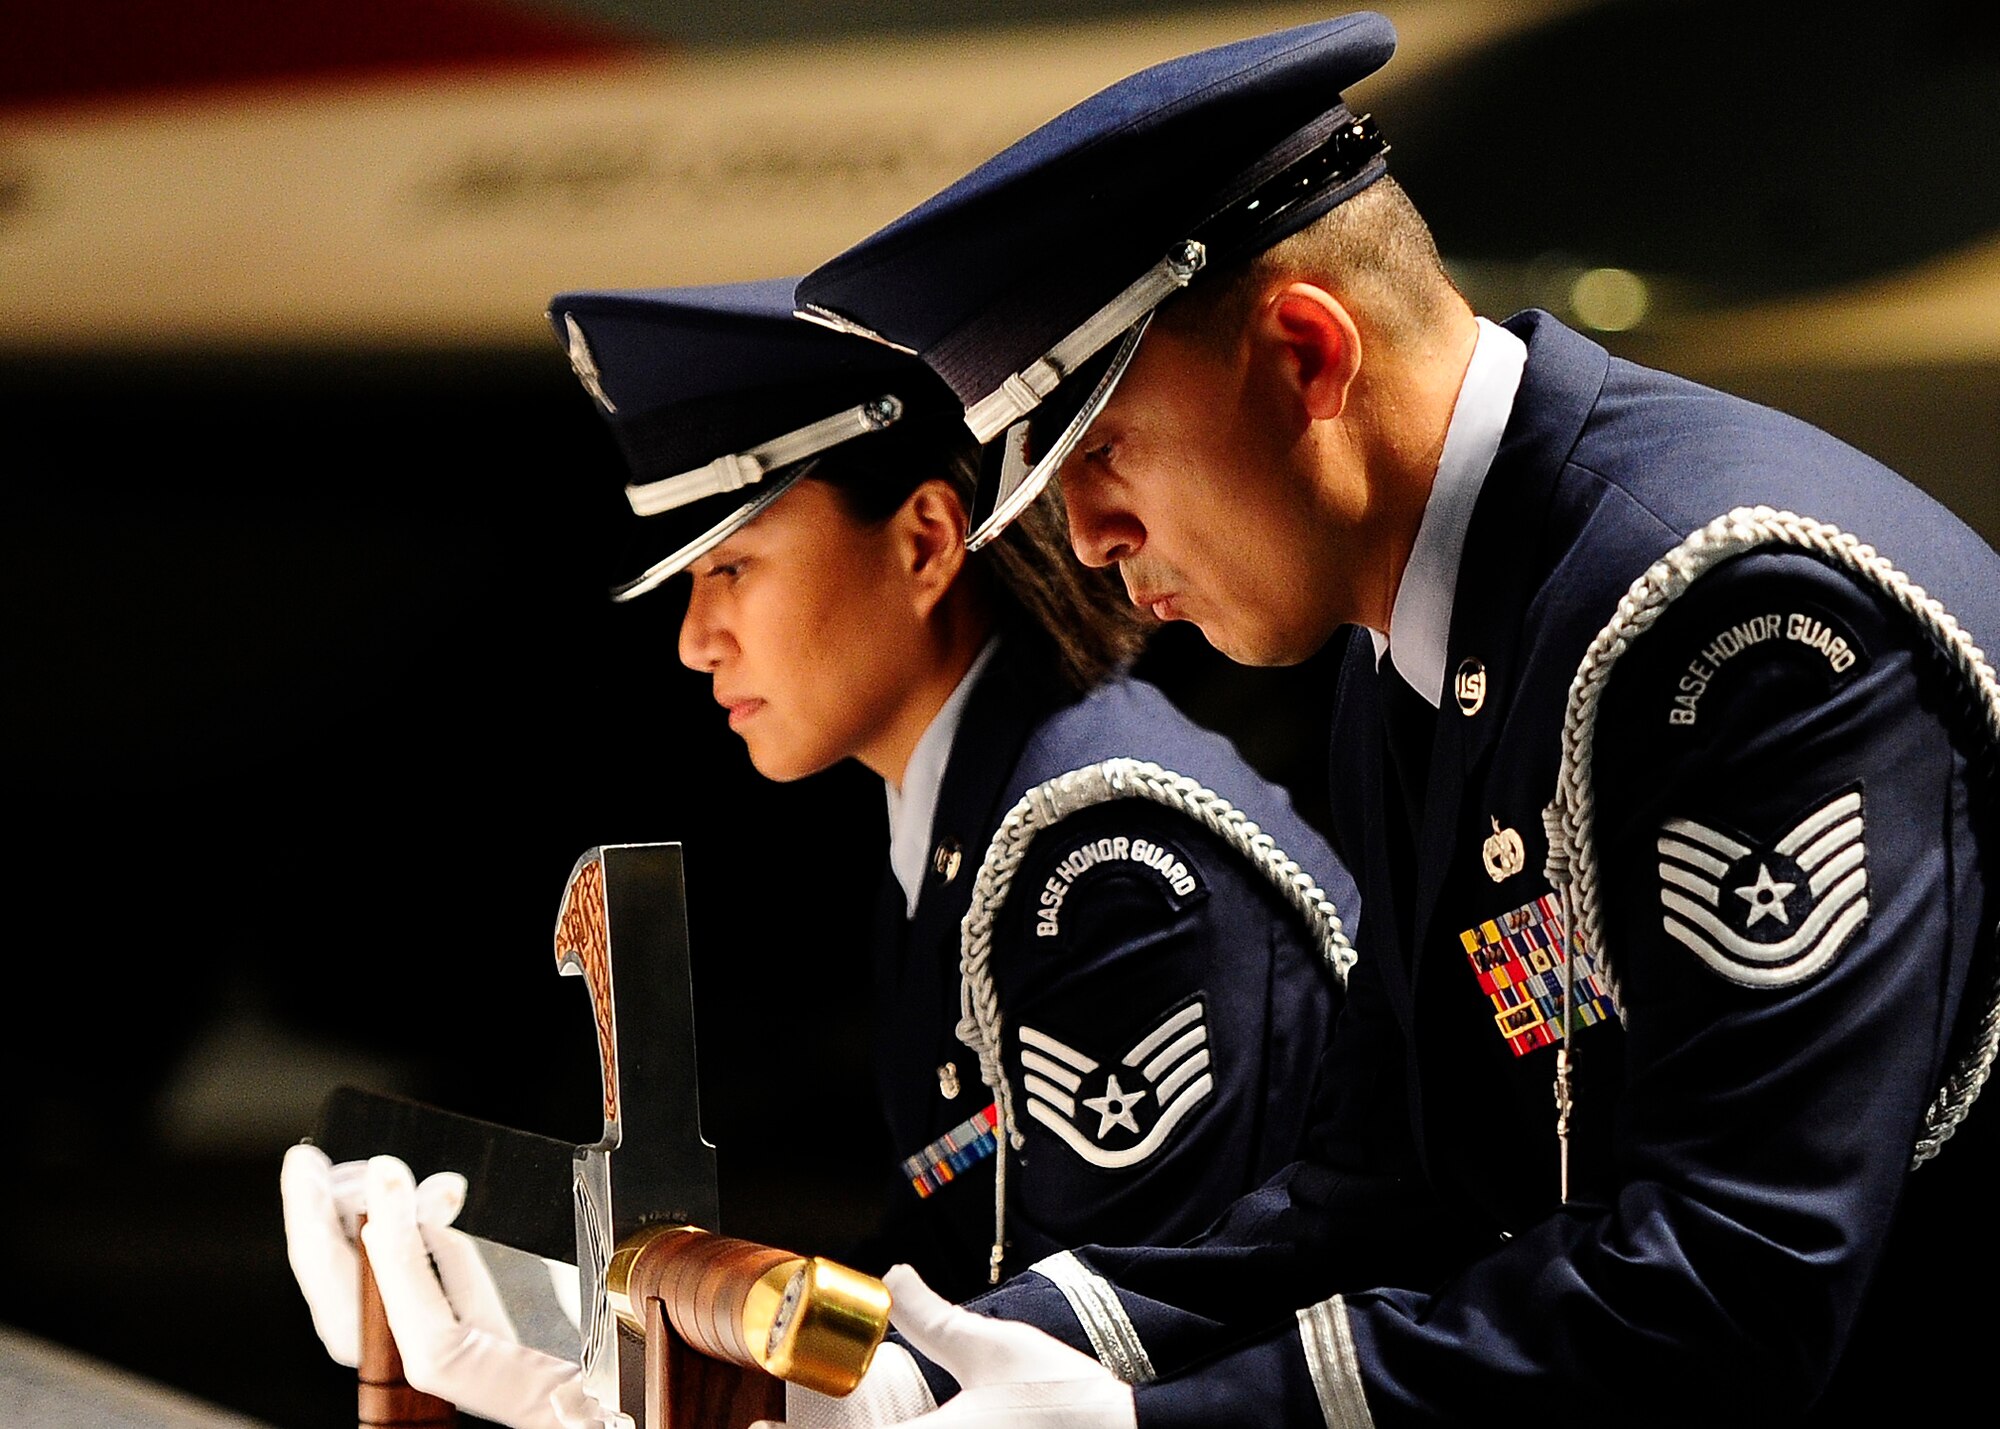 U.S. Air Force Honor Guard members Tech. Sgt. Juan Garcia and Staff Sgt. Annzen Salvador lift the sword used for the Order of the Sword ceremony at the Museum of Aviation in Warner Robins, Ga., July 13, 2016. The Order of the Sword is an honor awarded by NCOs of a command to recognize individuals they hold in high esteem and for their contributions to the enlisted corps. (U.S. Air Force photo/Tech. Sgt. Stephen D. Schester)                      